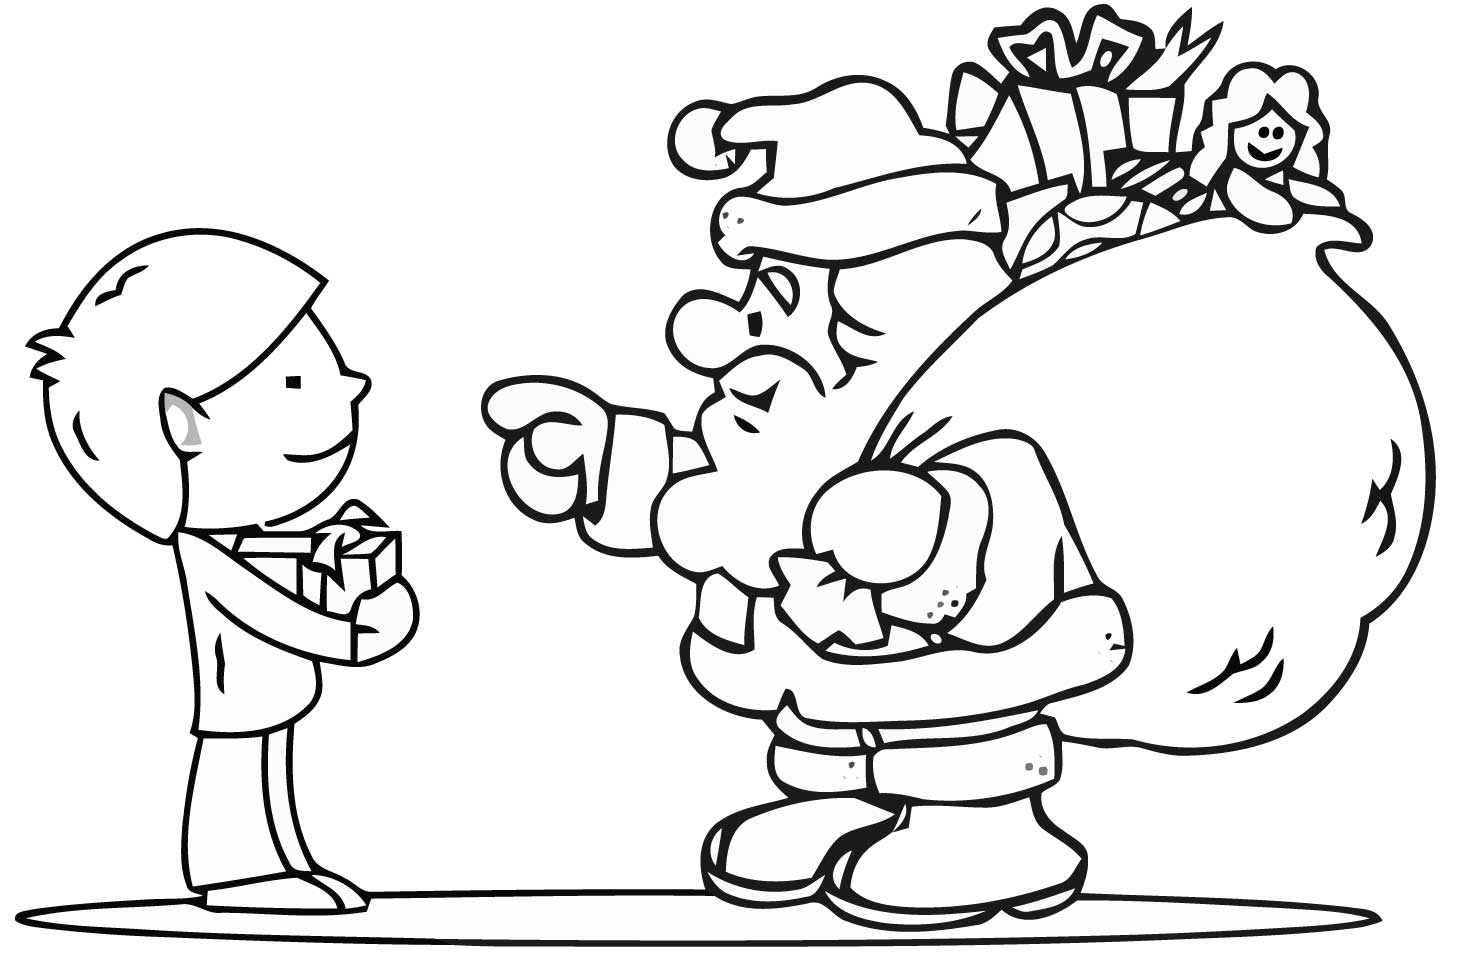 christmas santa claus coloring pages free christmas colouring pages for children kids online christmas santa claus coloring pages 